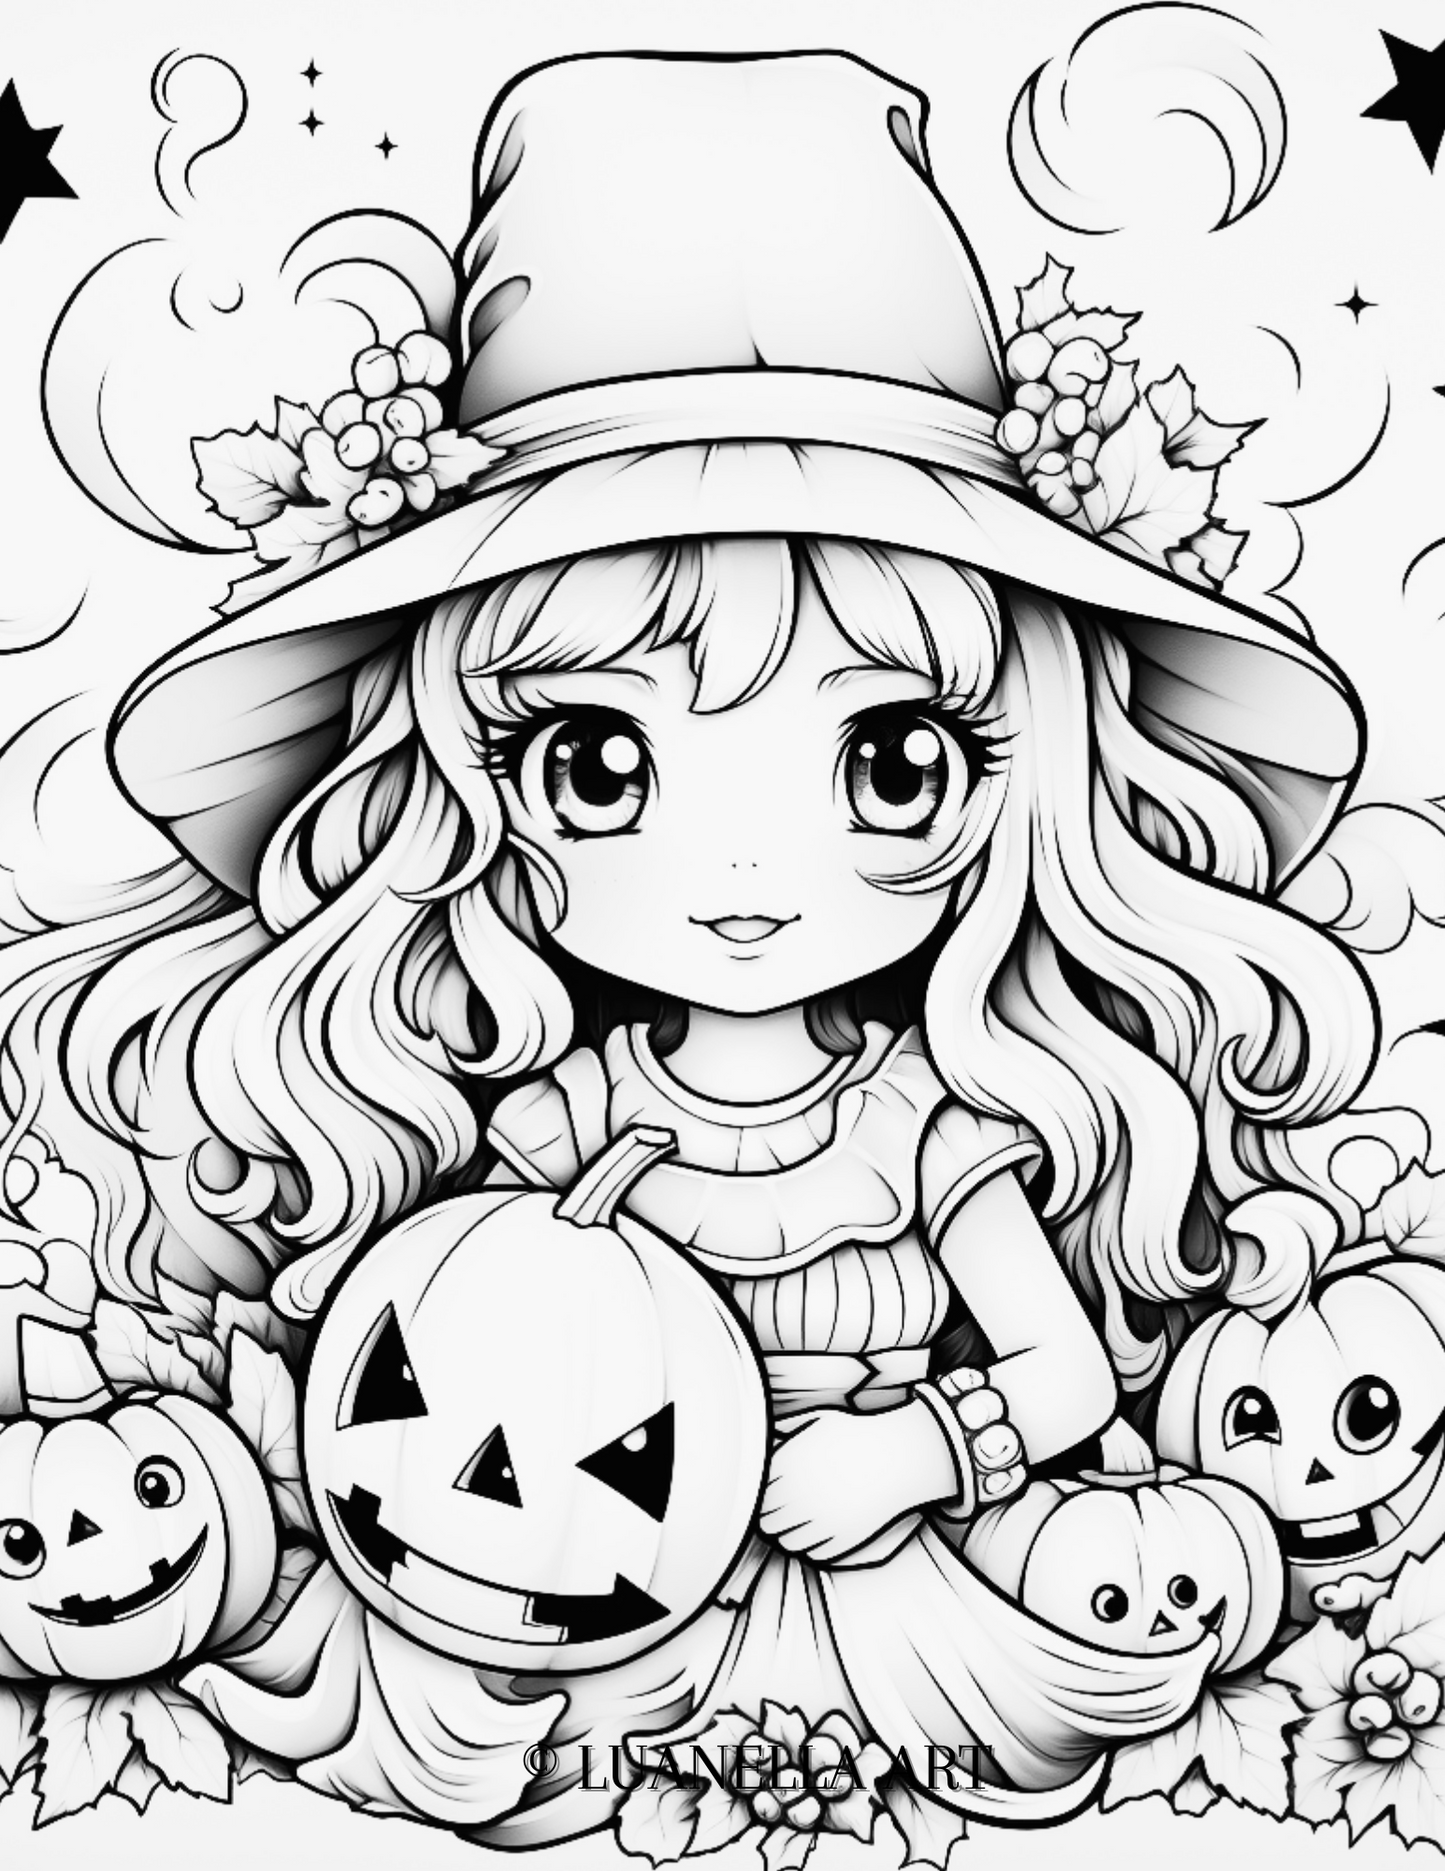 Cutie Patootie Witchy Witch with carved pumpkins | Coloring Page | Instant Digital Download